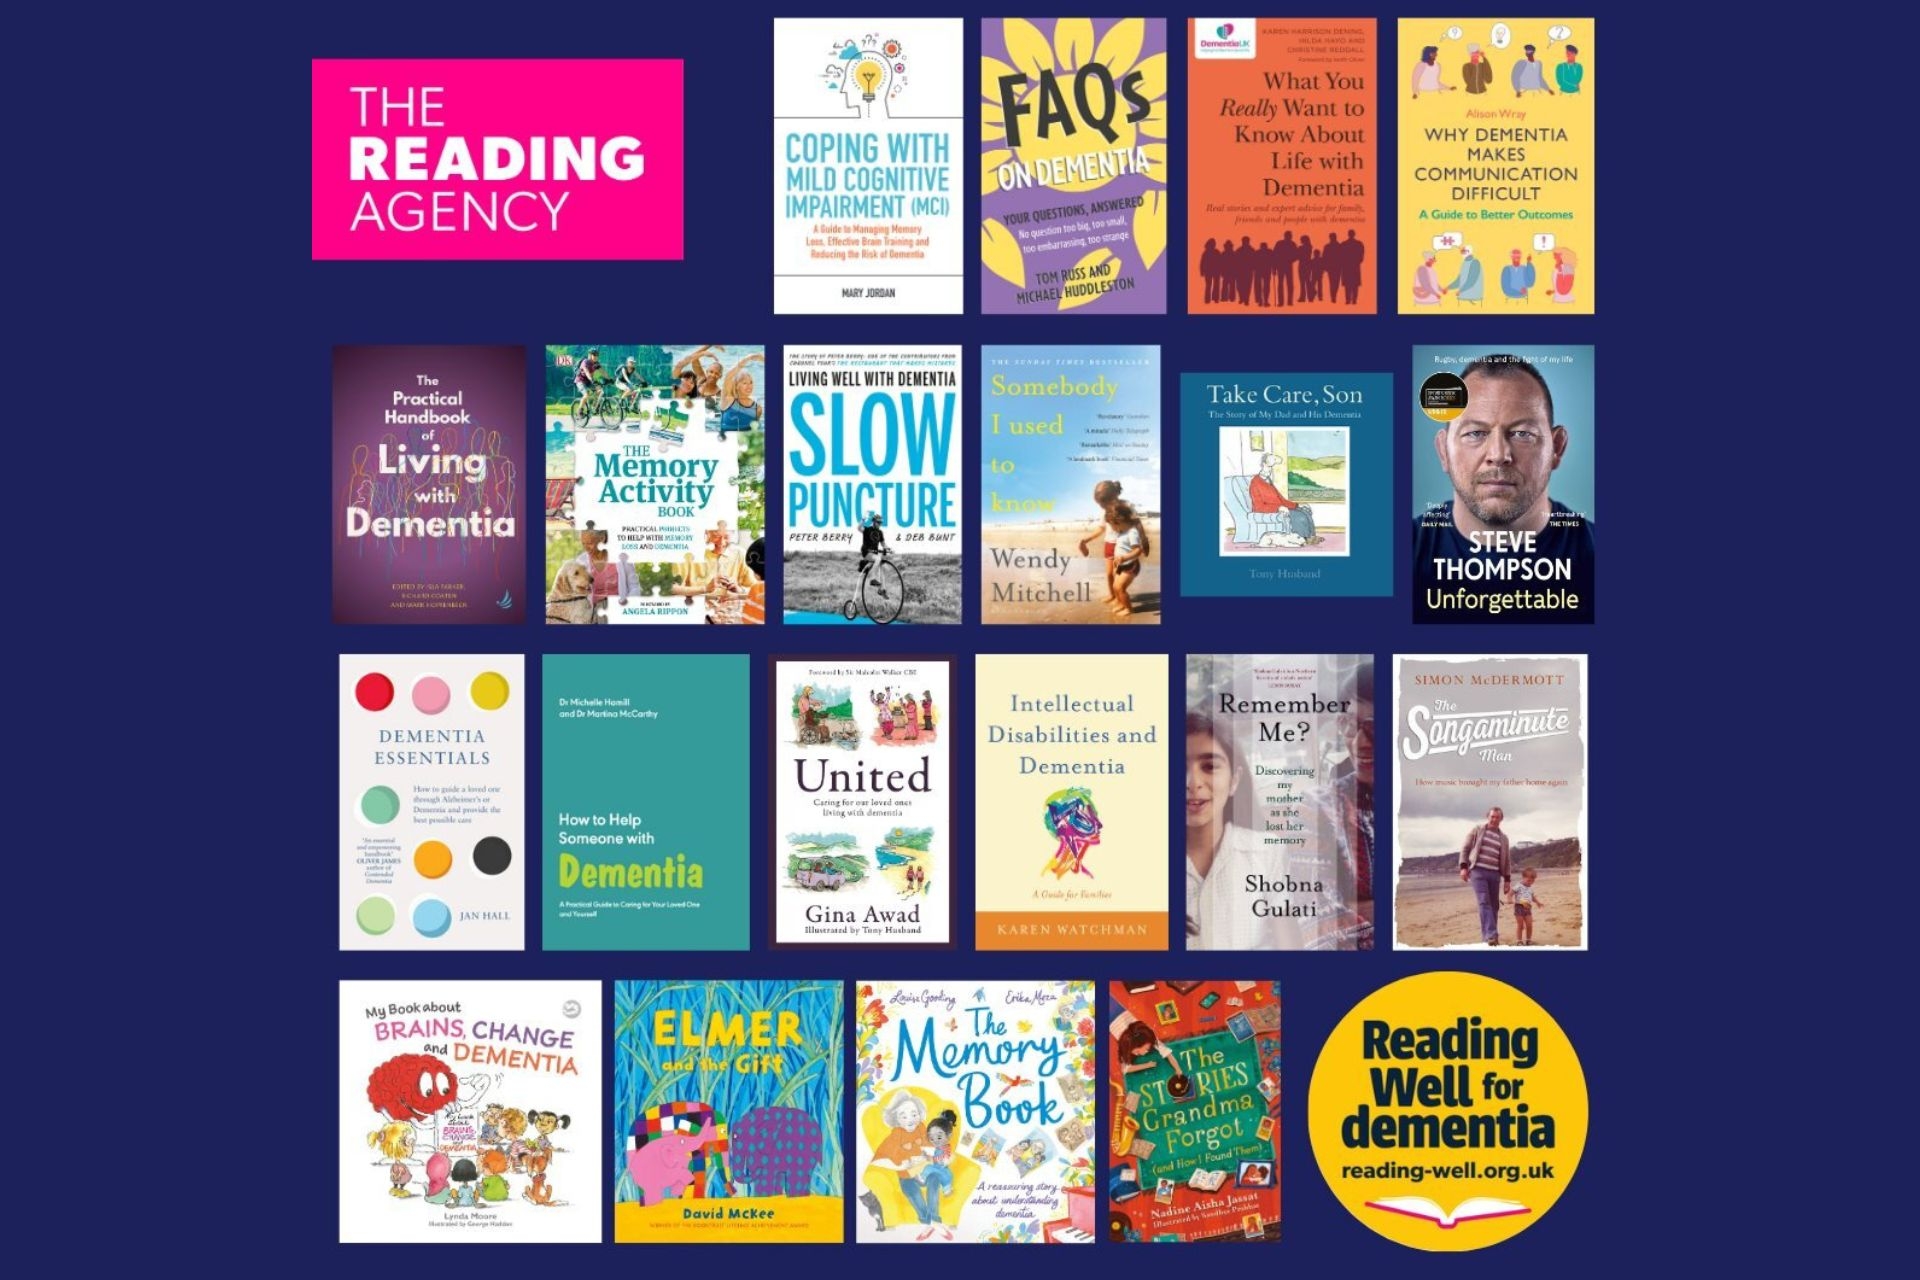 Reading Well for Dementia by The Reading Agency - Books for people living with dementia, including people affected by dementia